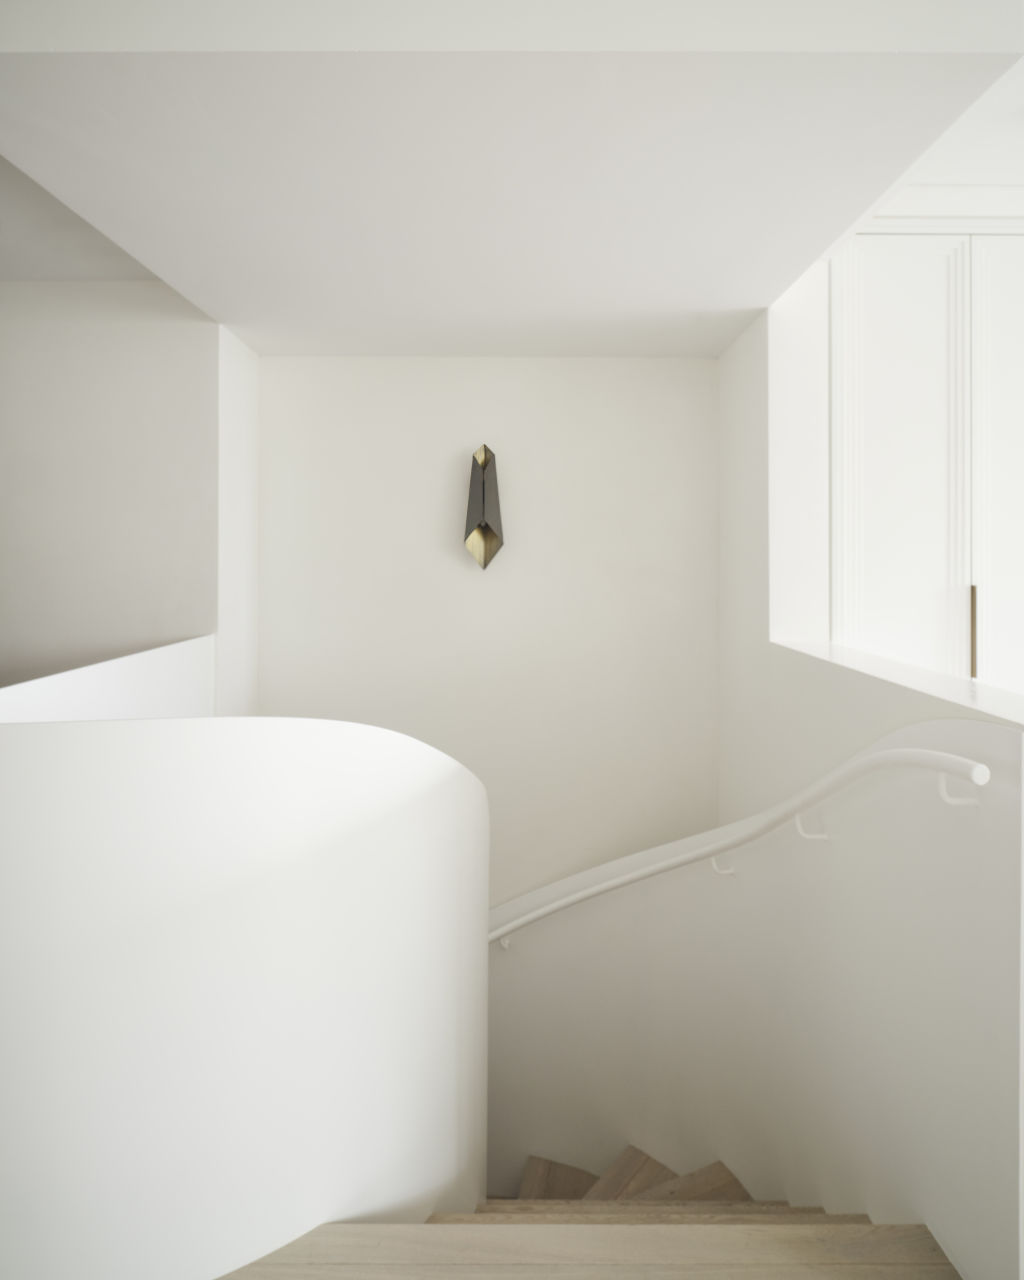 The staircase presents itself as a work of art. Photo: Supplied